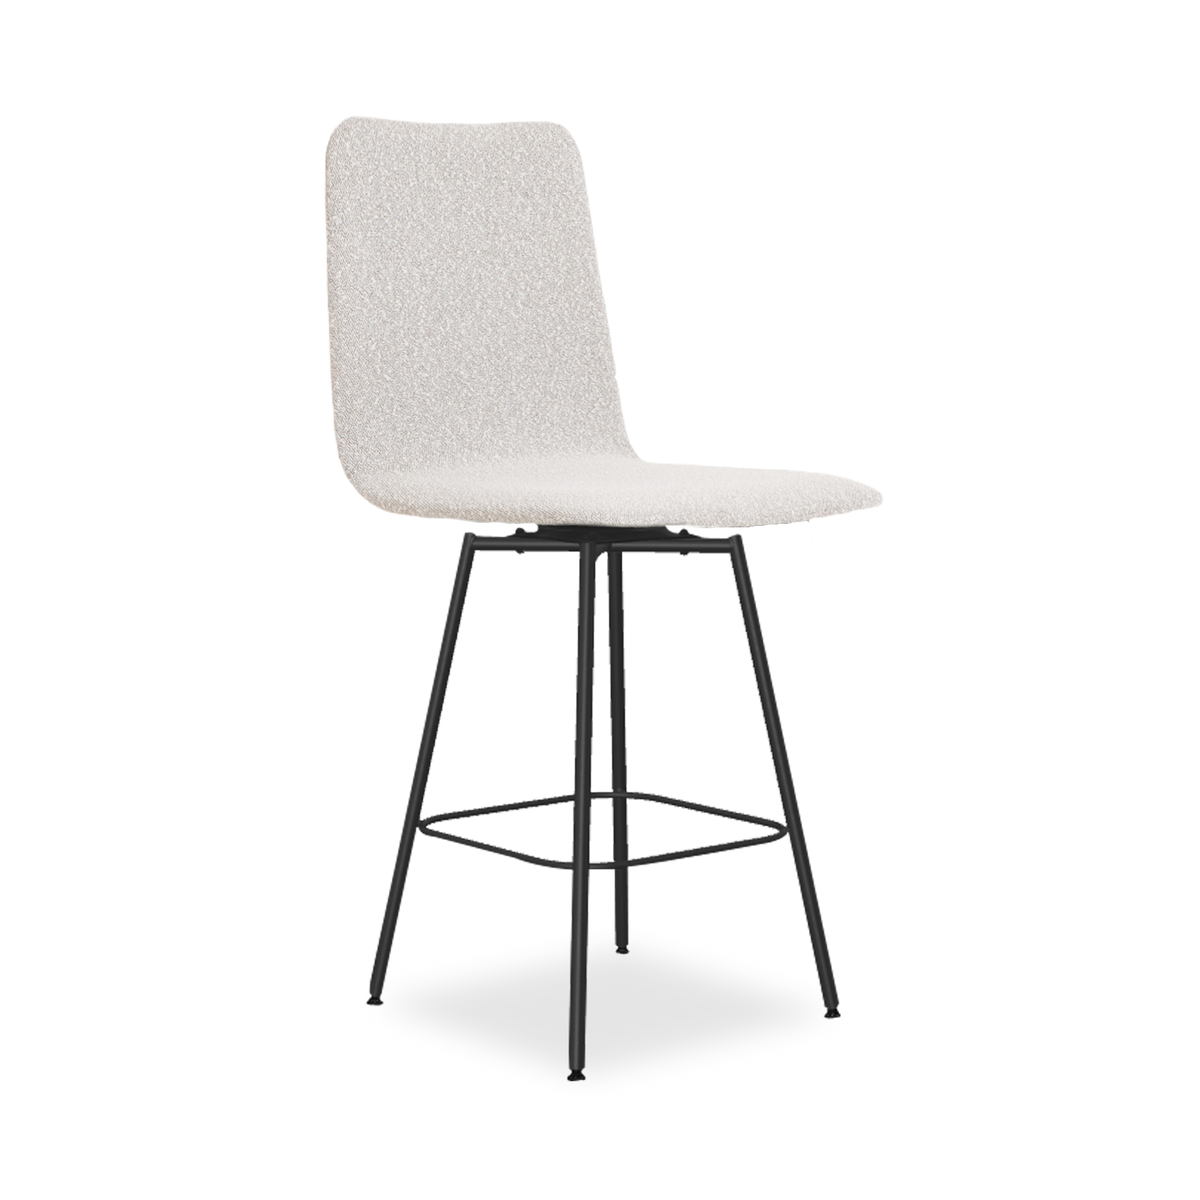 With its sharp silhouette, the Urbano Counter Stool offers an elevated versatile style.